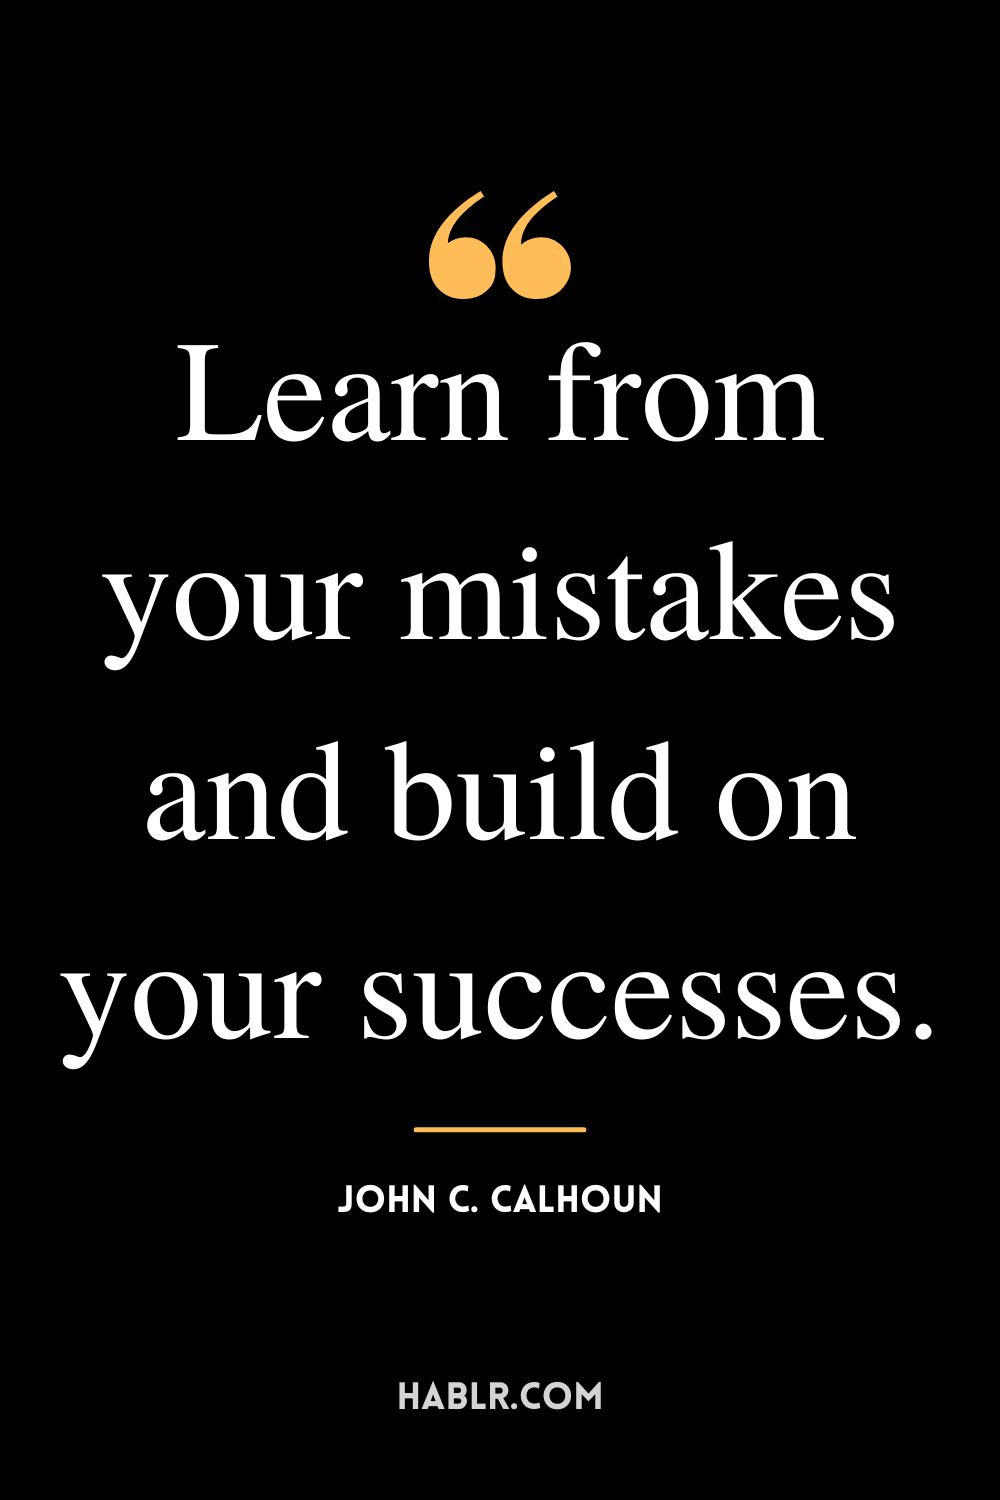 “Learn from your mistakes and build on your successes.” -John C. Calhoun